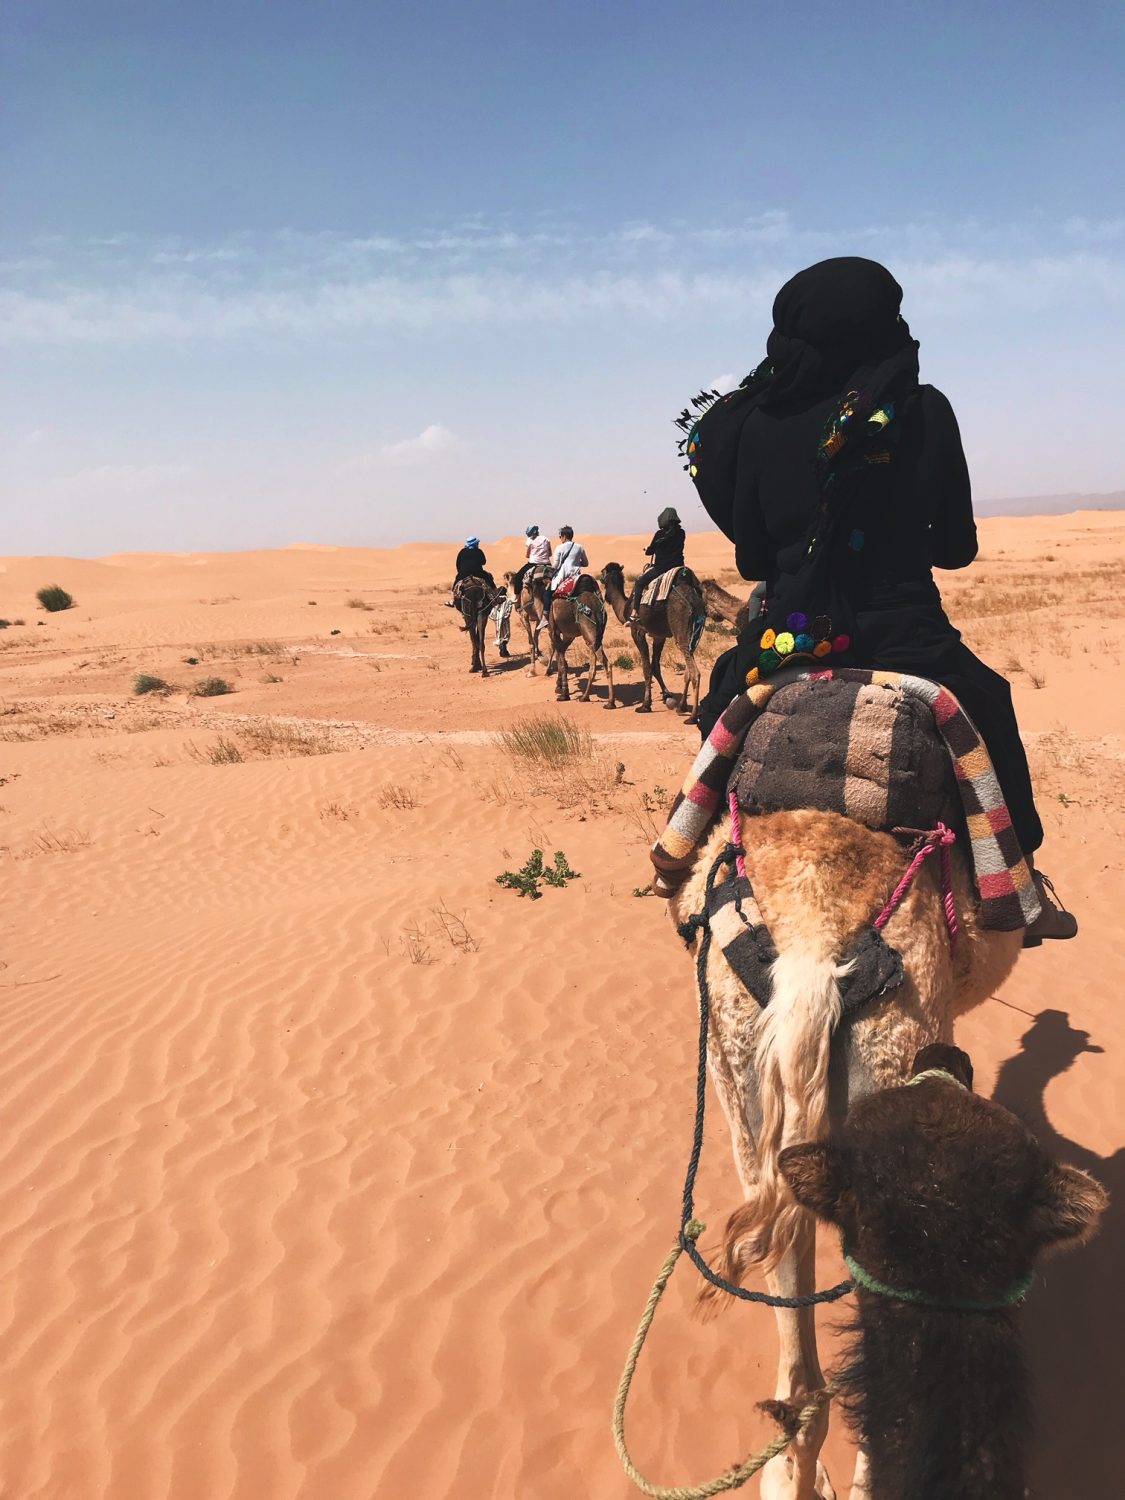 My Journey In Morocco | The Sahara Part One